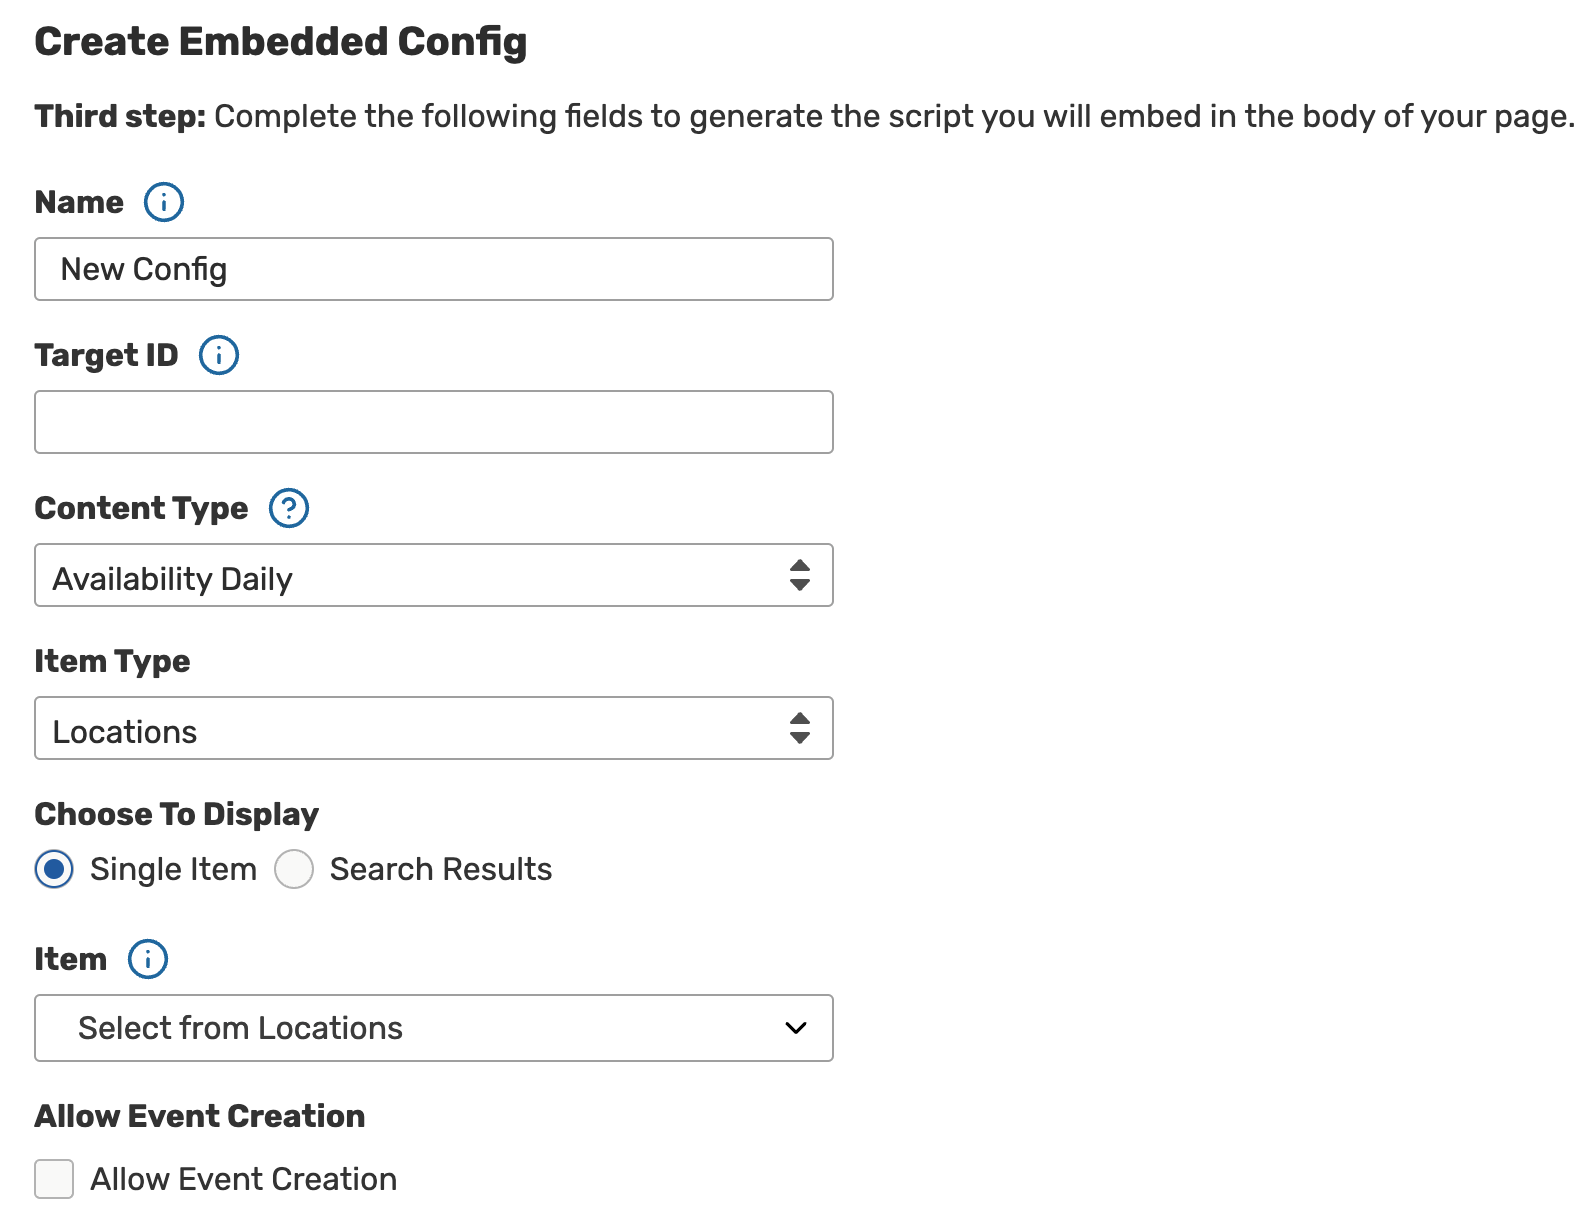 Create Embedded Config form